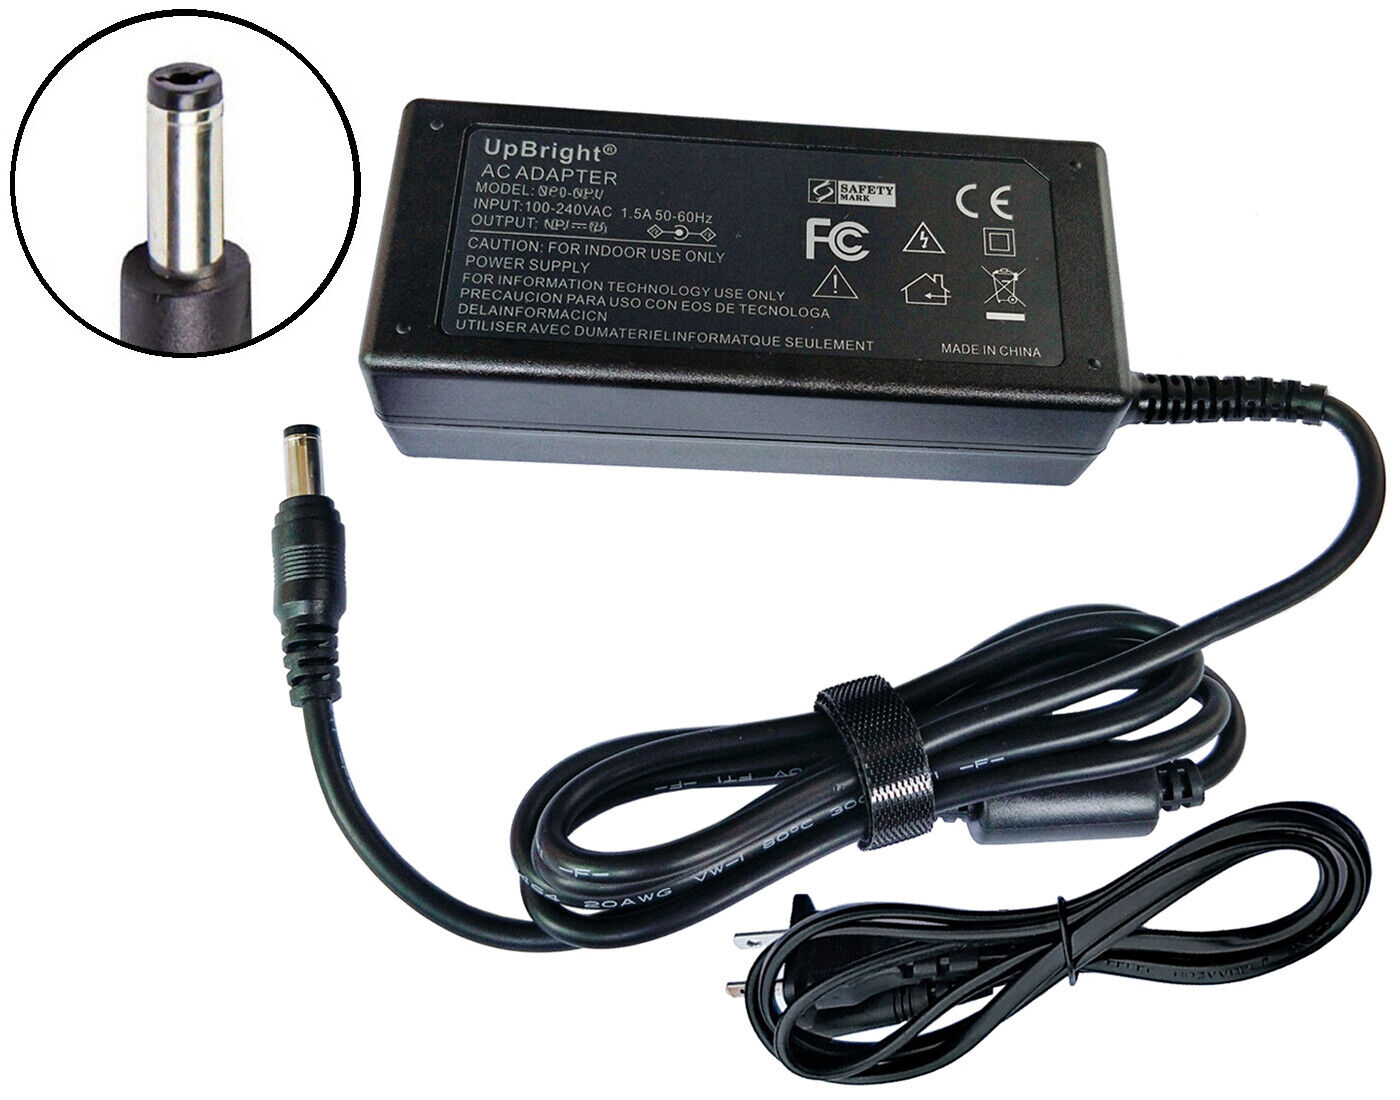 12V AC Adapter For DeVilbiss Suction Unit 7305 Series Aspirator Machine Charger